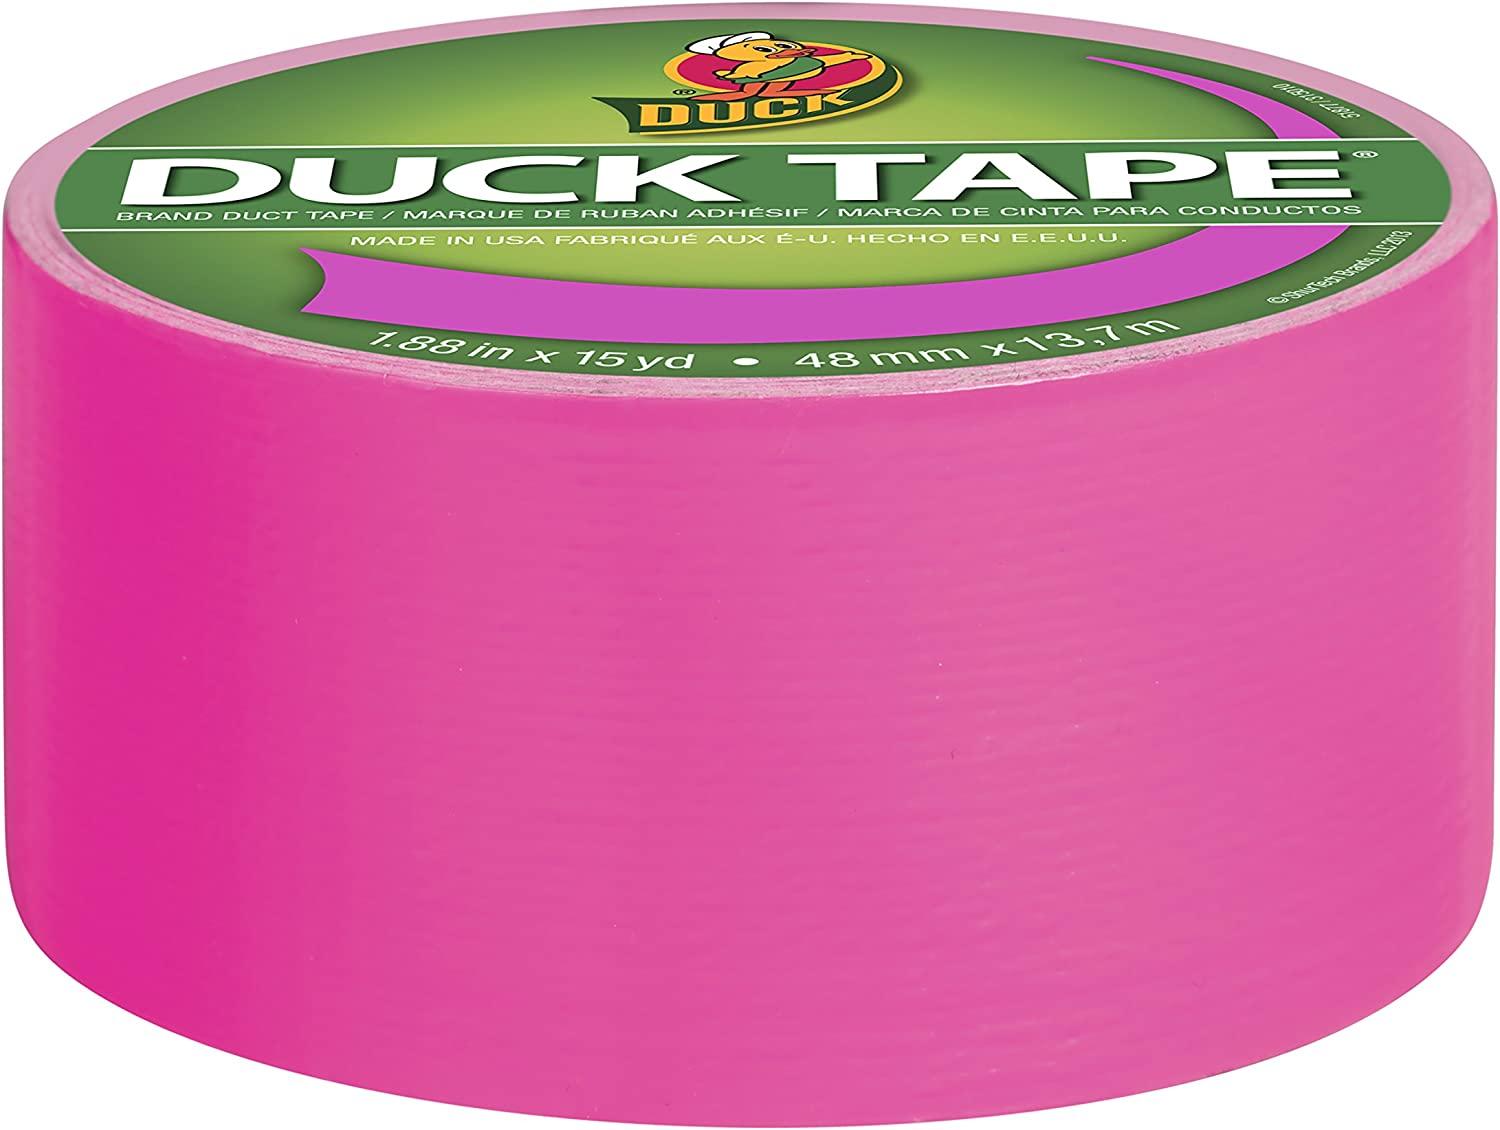 Duck 1.88 Old School Silver Color Duct Tape